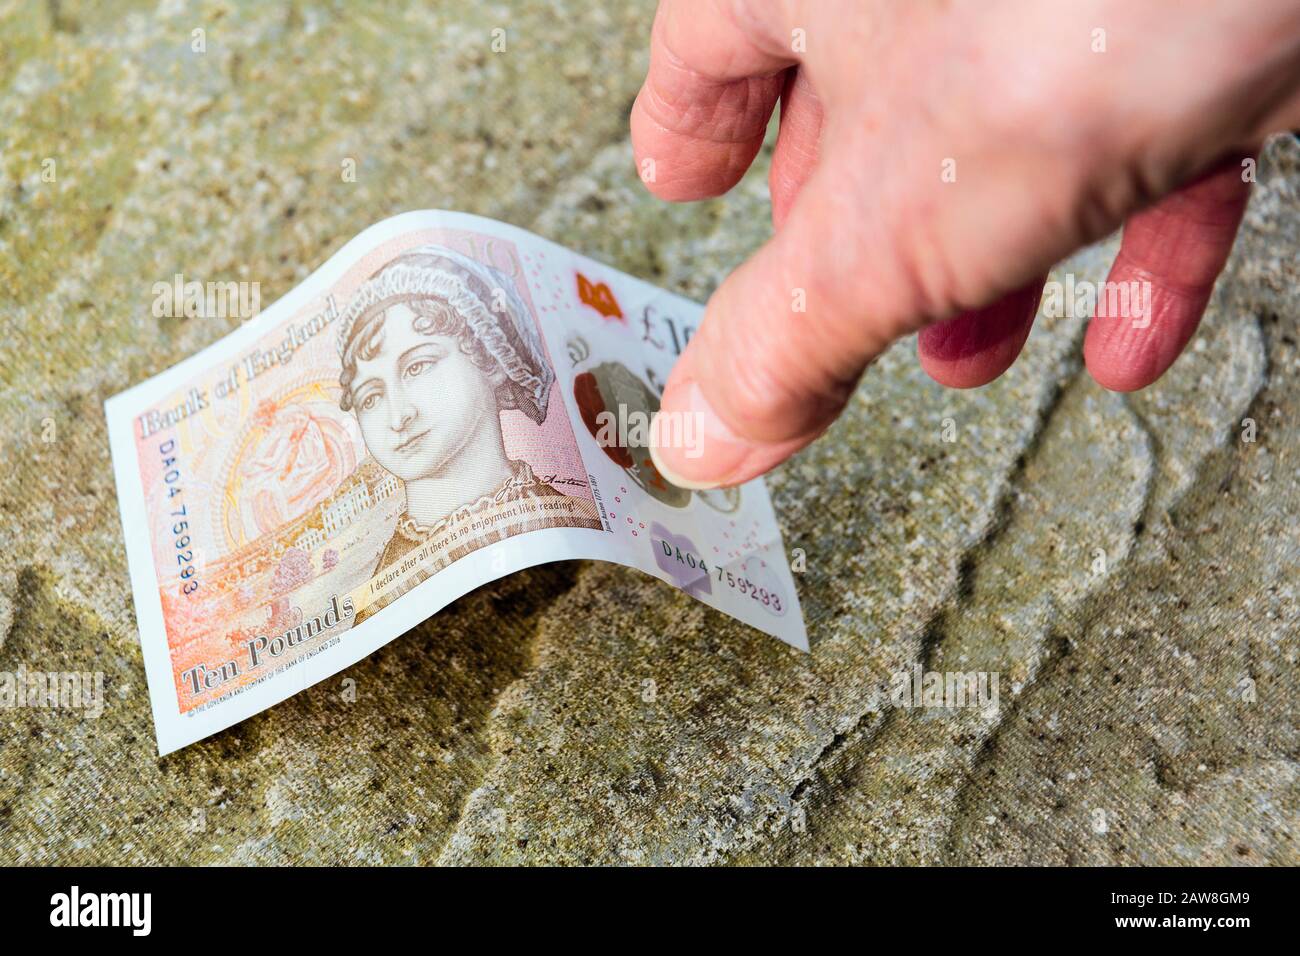 A lucky senior person pensioner finds money on the ground hand reaches down to pick up a new ten pound note pounds off the floor. England UK Britain Stock Photo